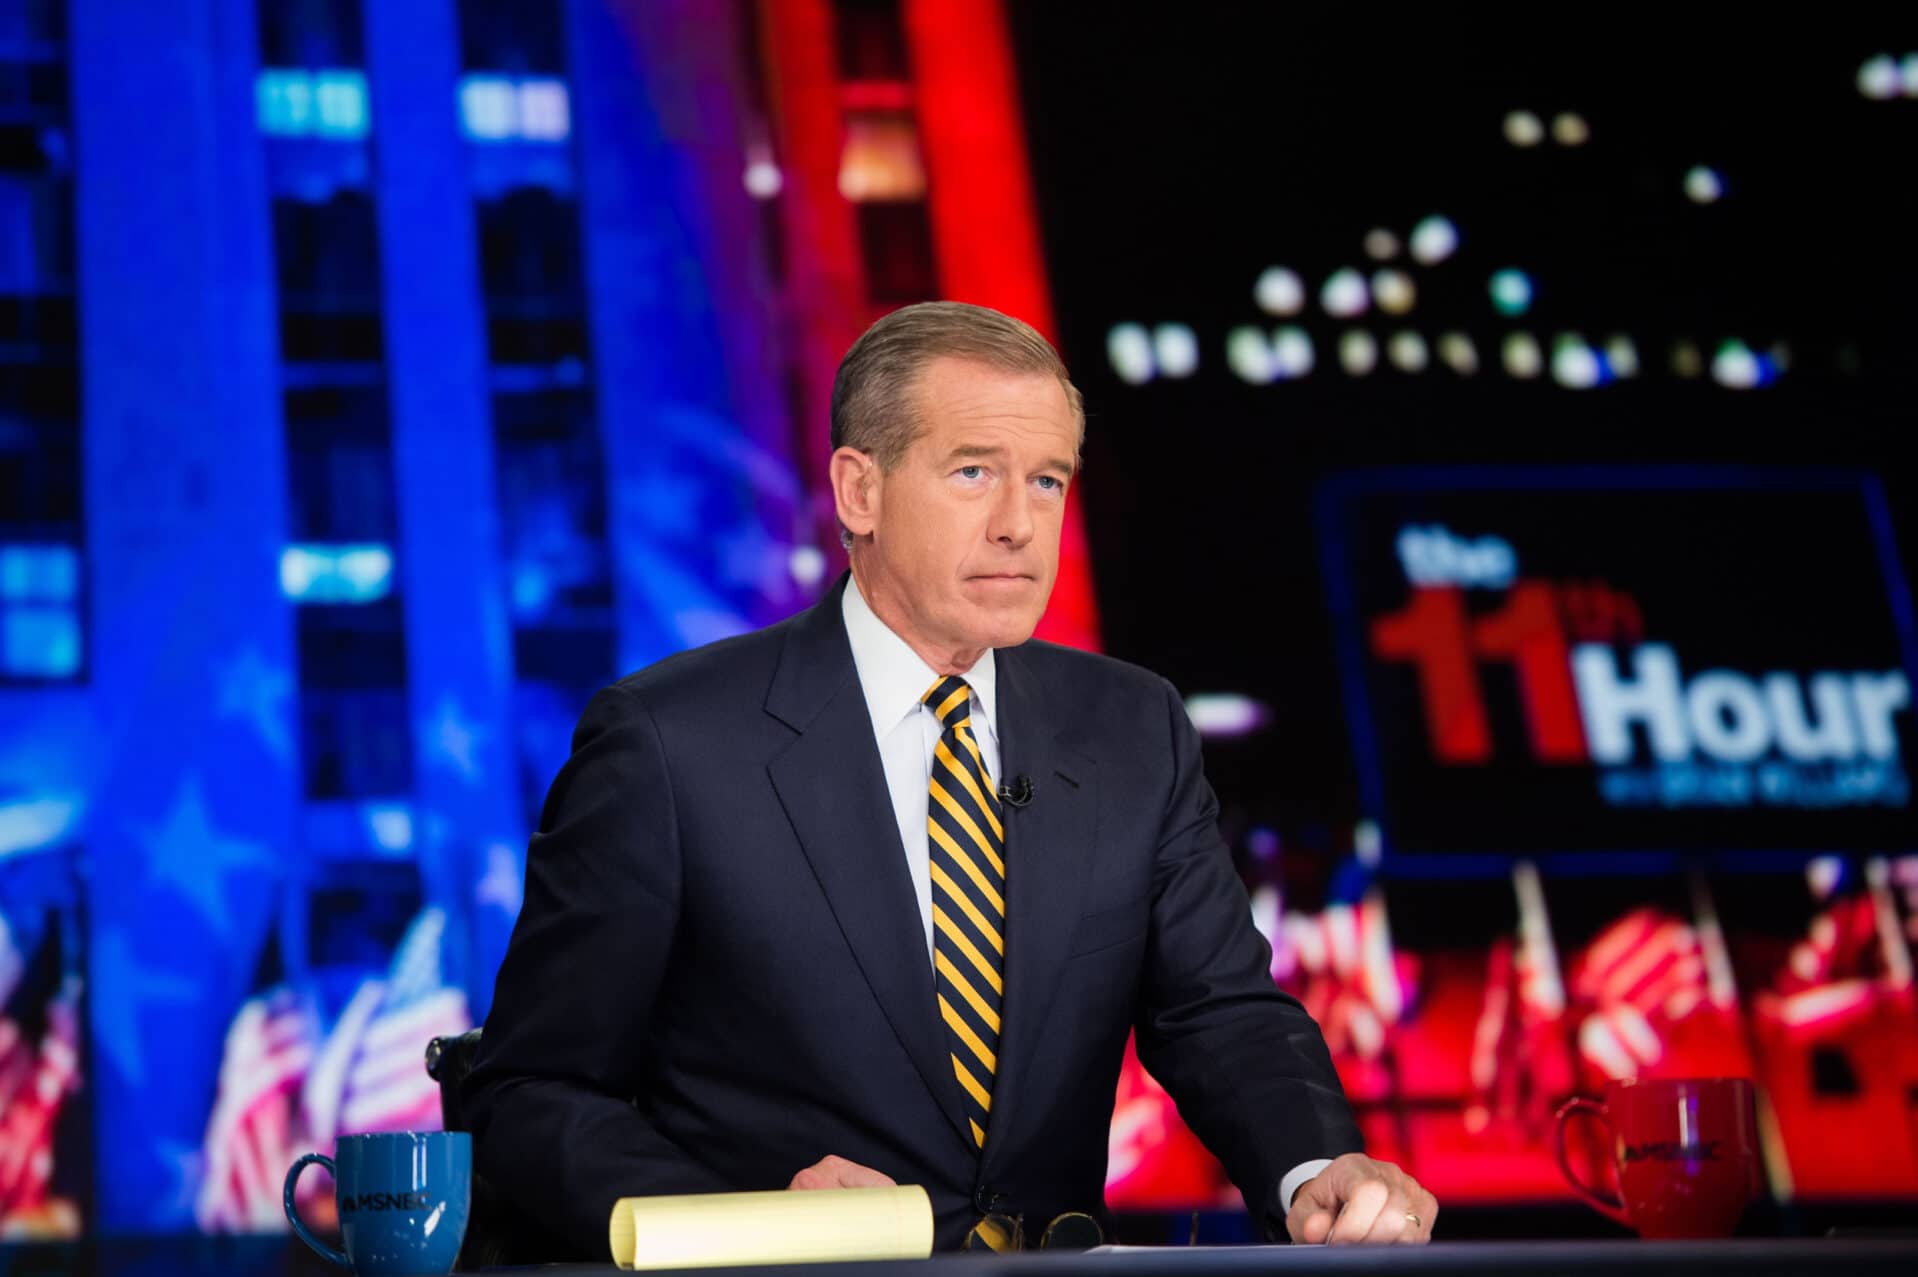 Brian Williams does television news reporting